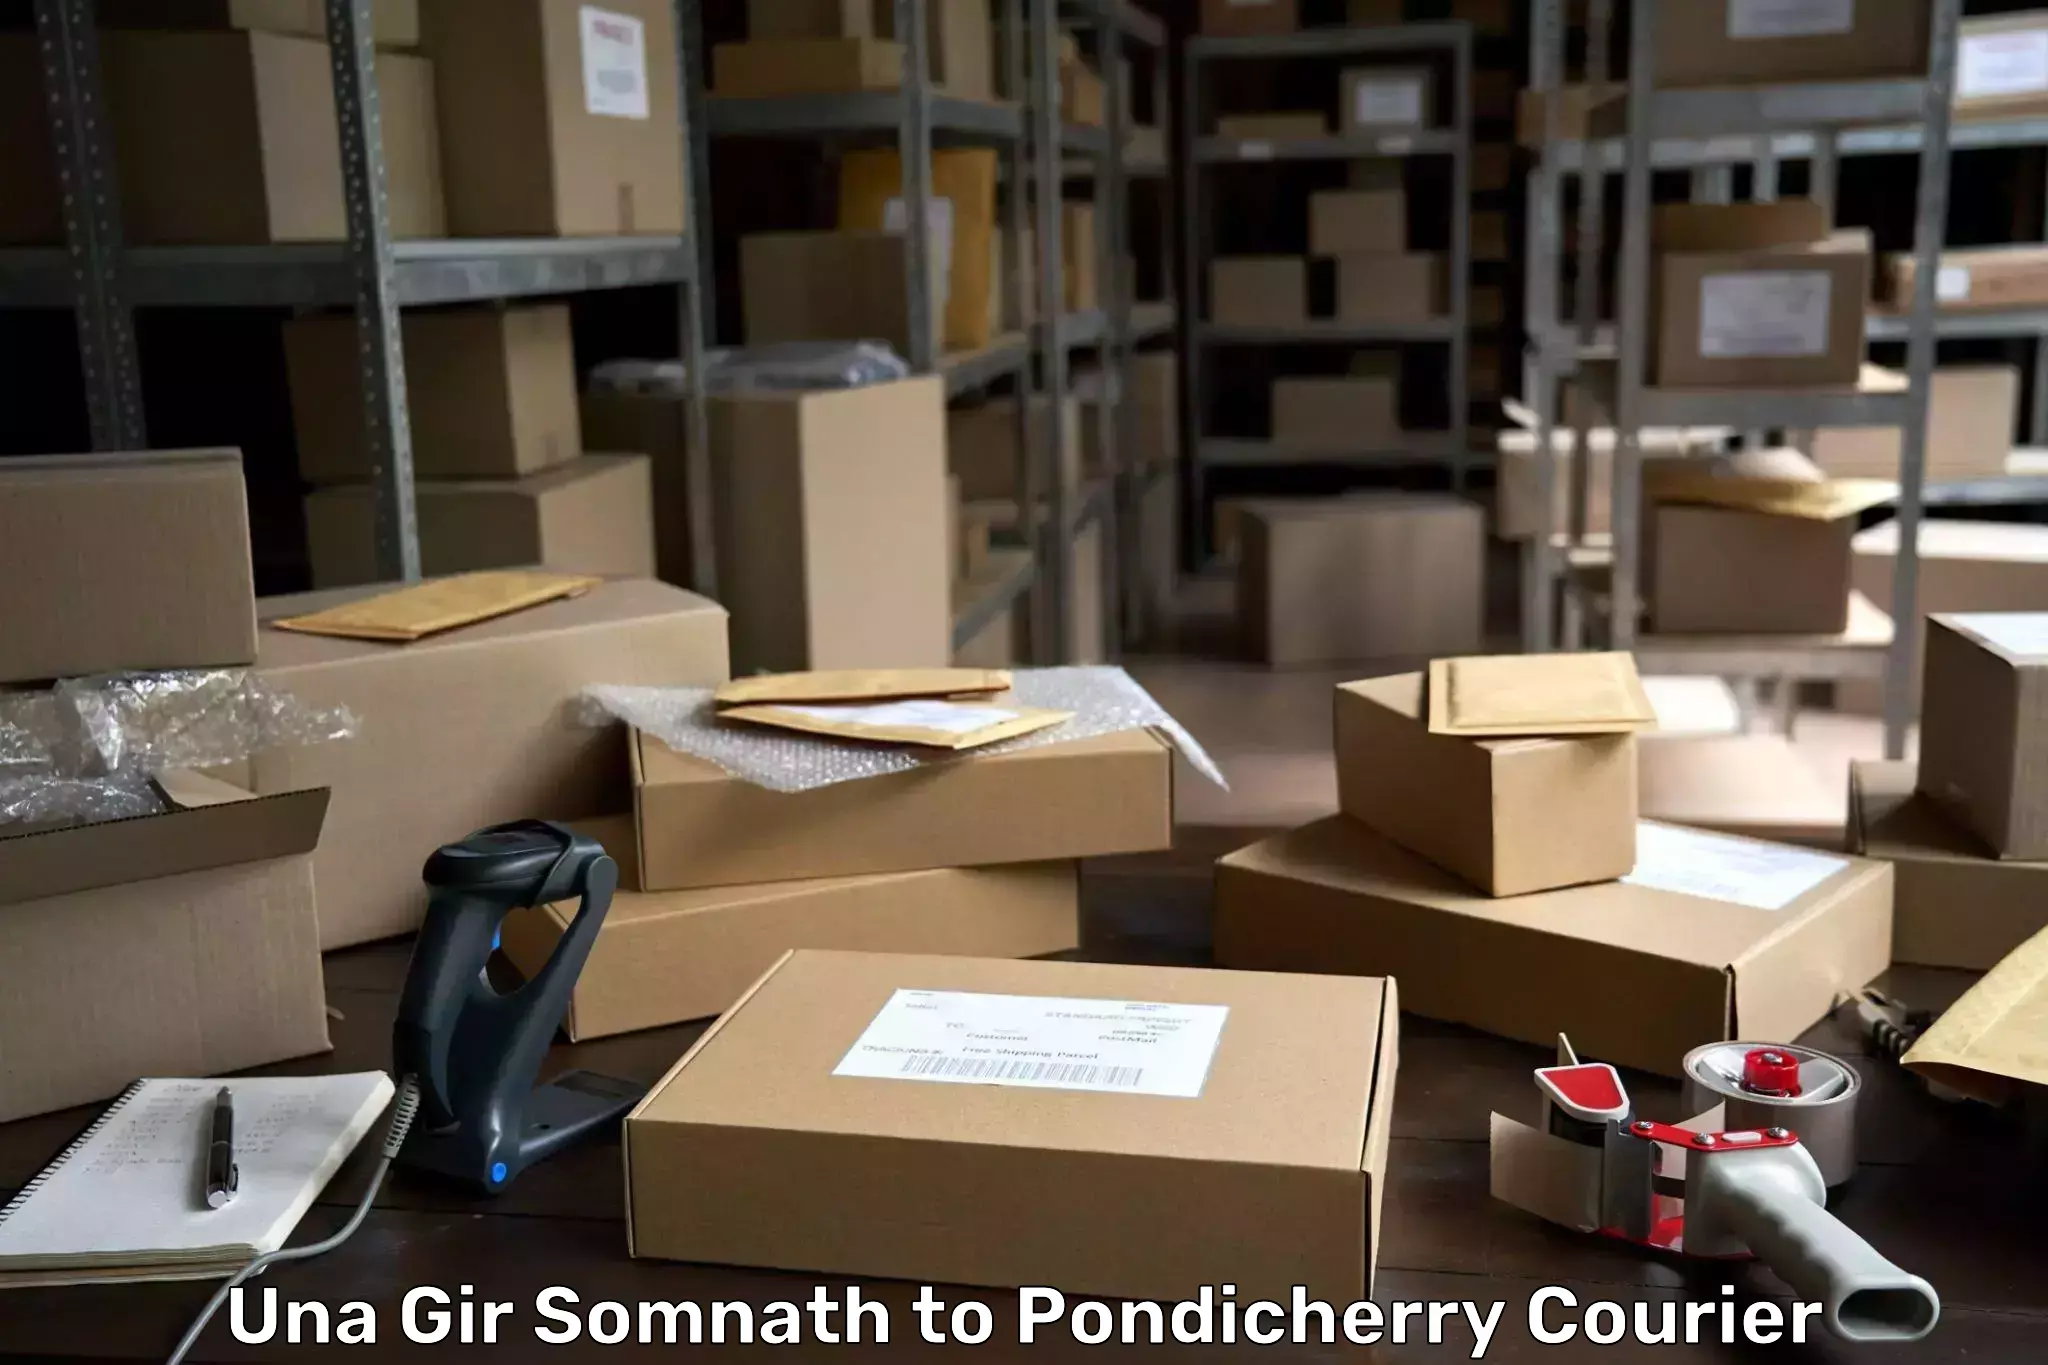 24-hour courier service Una Gir Somnath to Metttupalayam